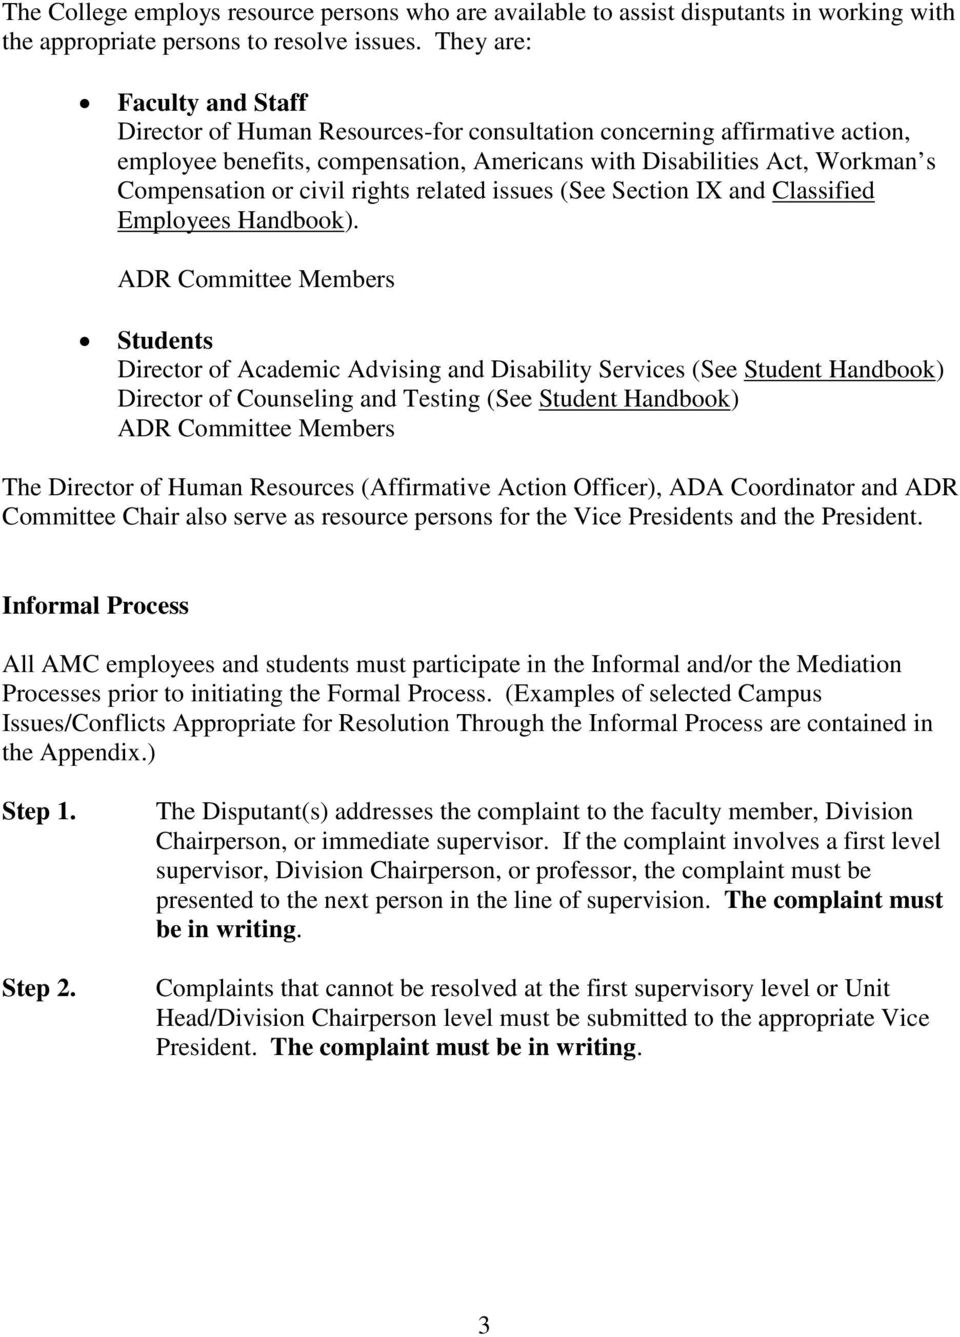 civil rights related issues (See Section IX and Classified Employees Handbook).